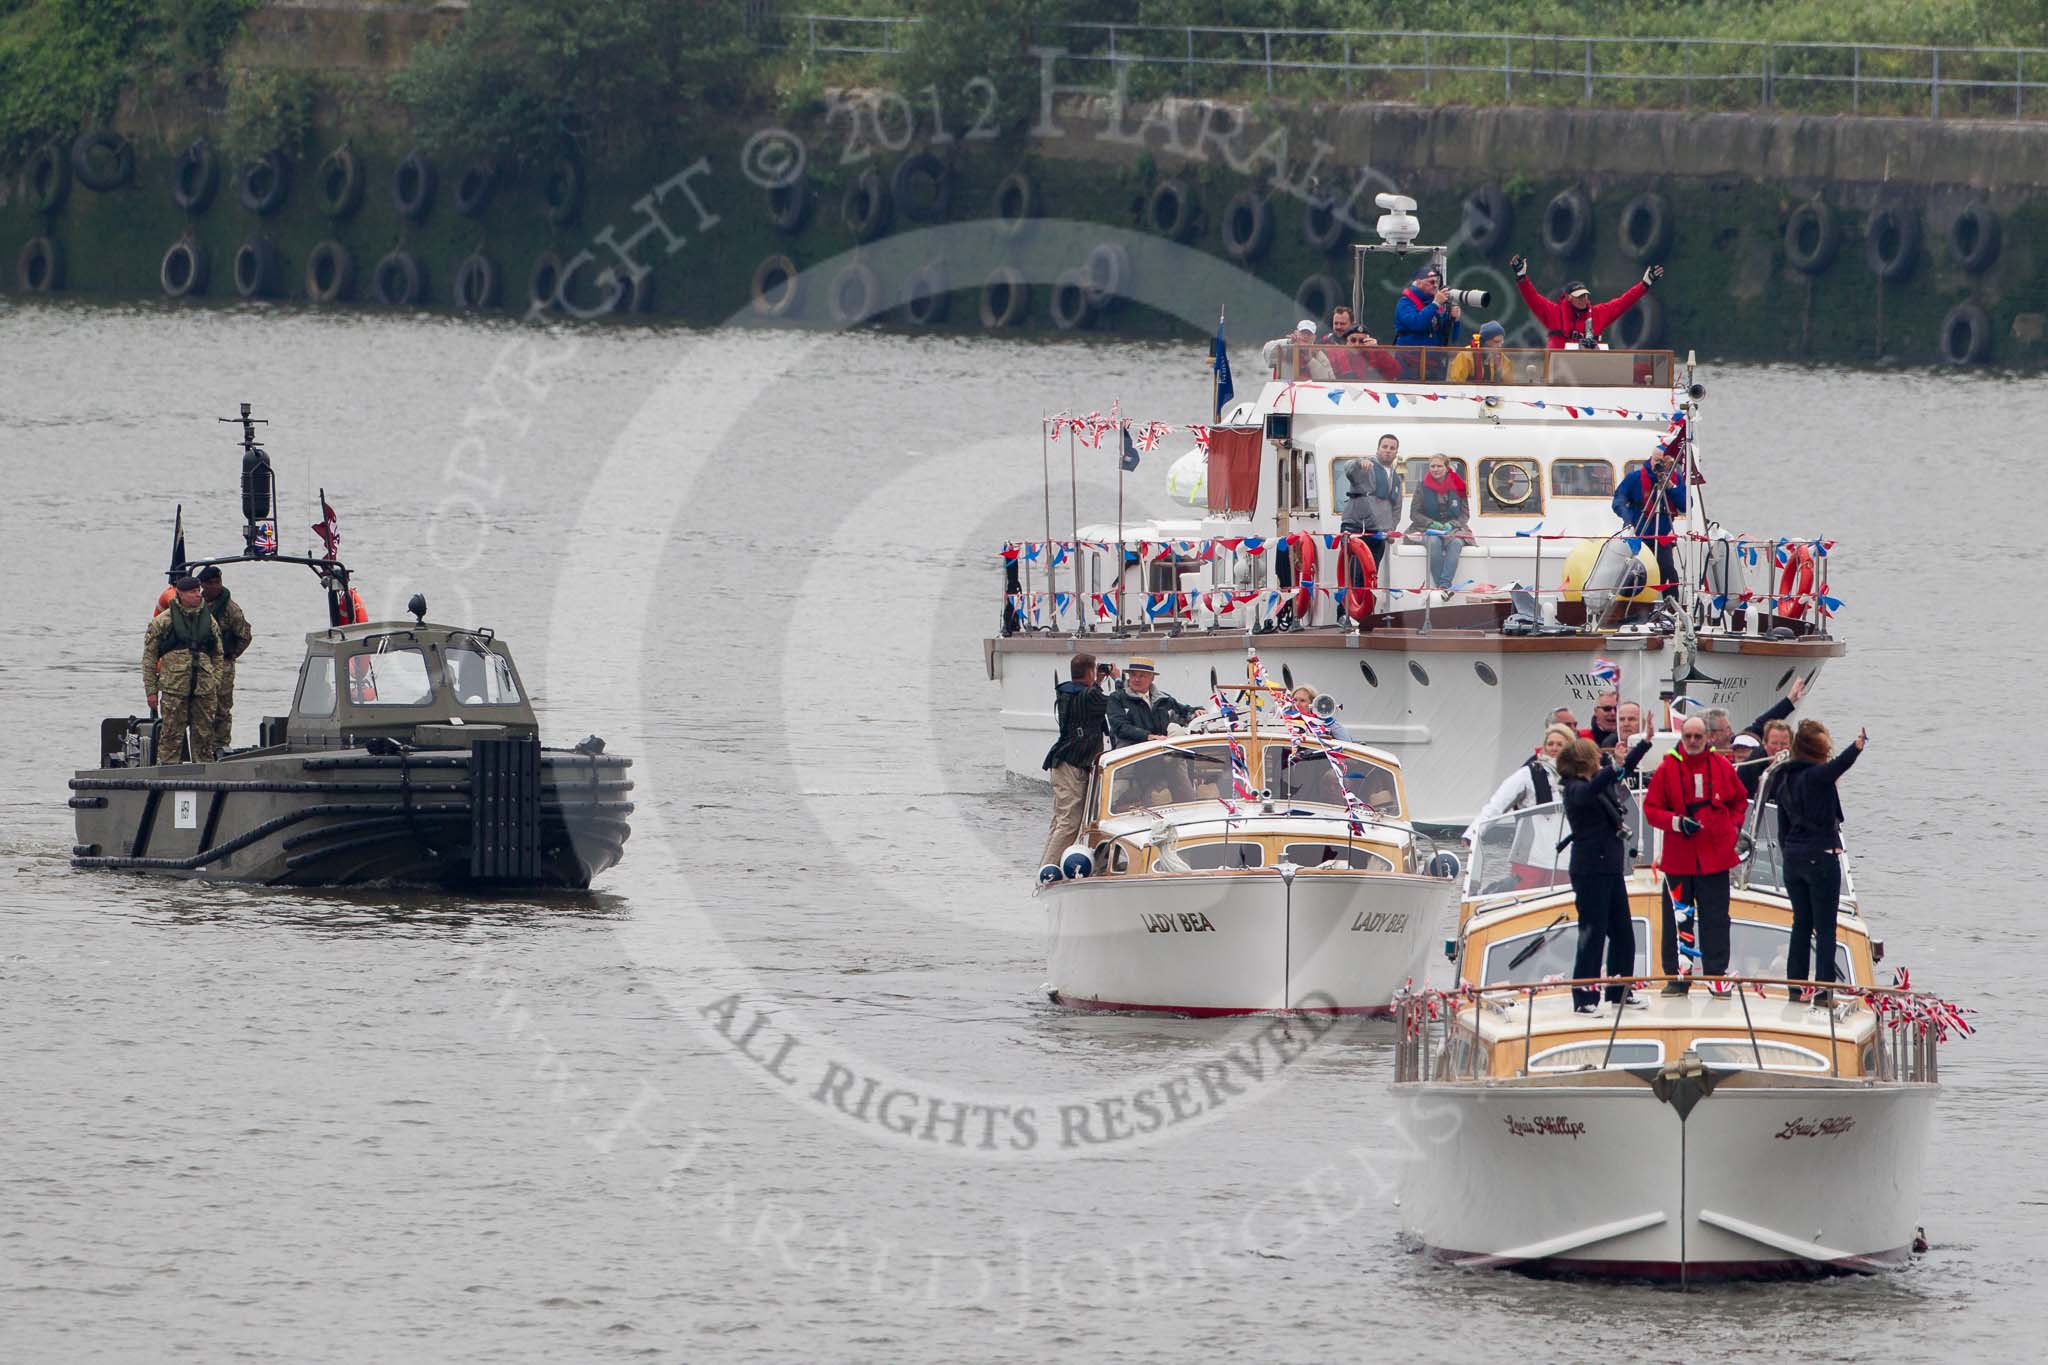 Thames Diamond Jubilee Pageant: LAUNCHES- Louis Phillipe (H52), Lady Bea (H56) and FORCES Amiens RASC (H61) and  Combat Support Boat (H59)..
River Thames seen from Battersea Bridge,
London,

United Kingdom,
on 03 June 2012 at 15:20, image #326